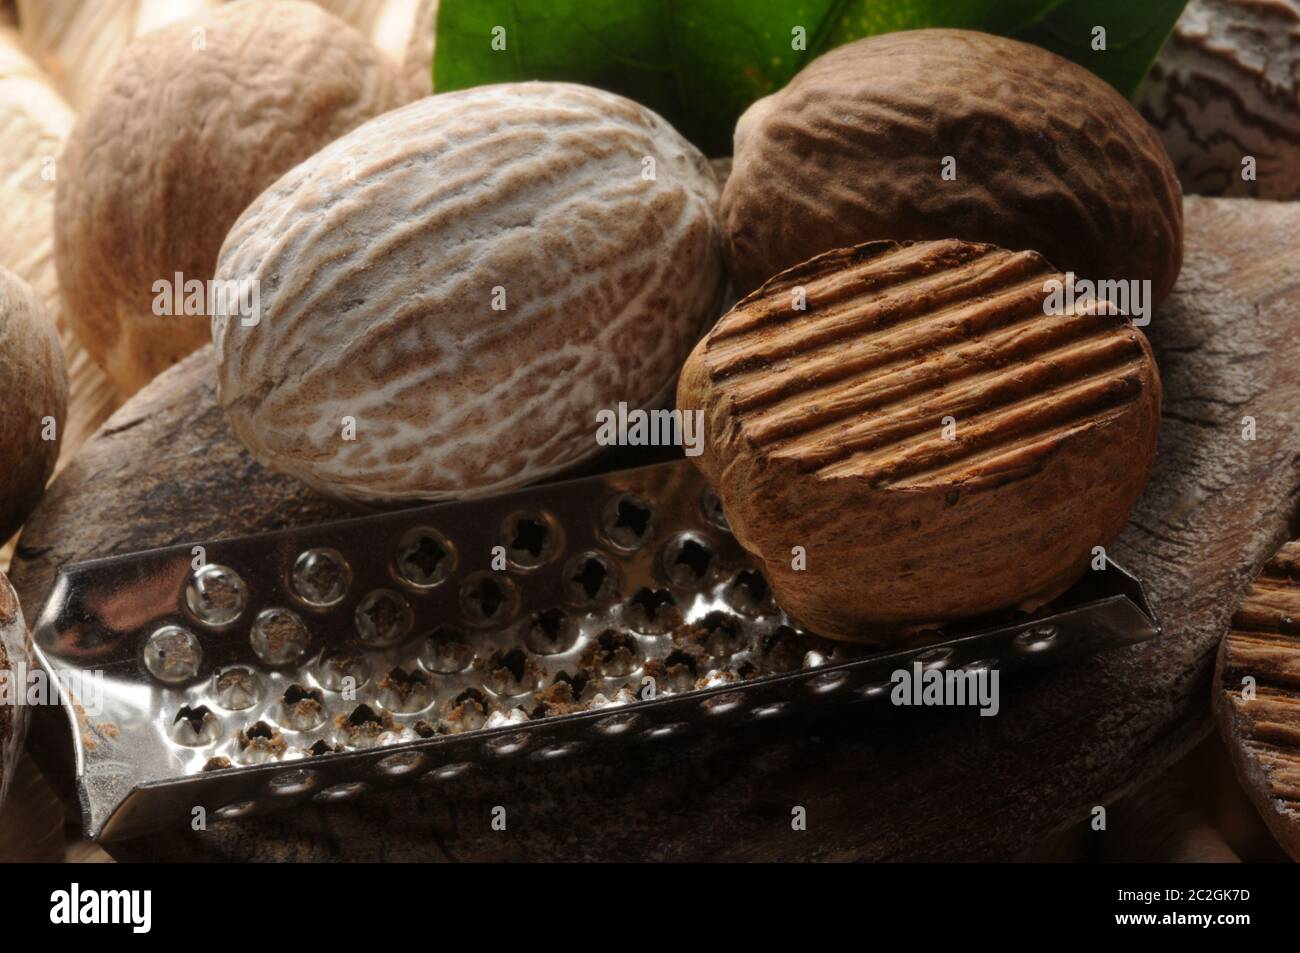 Closeup of nutmegs with grater Stock Photo